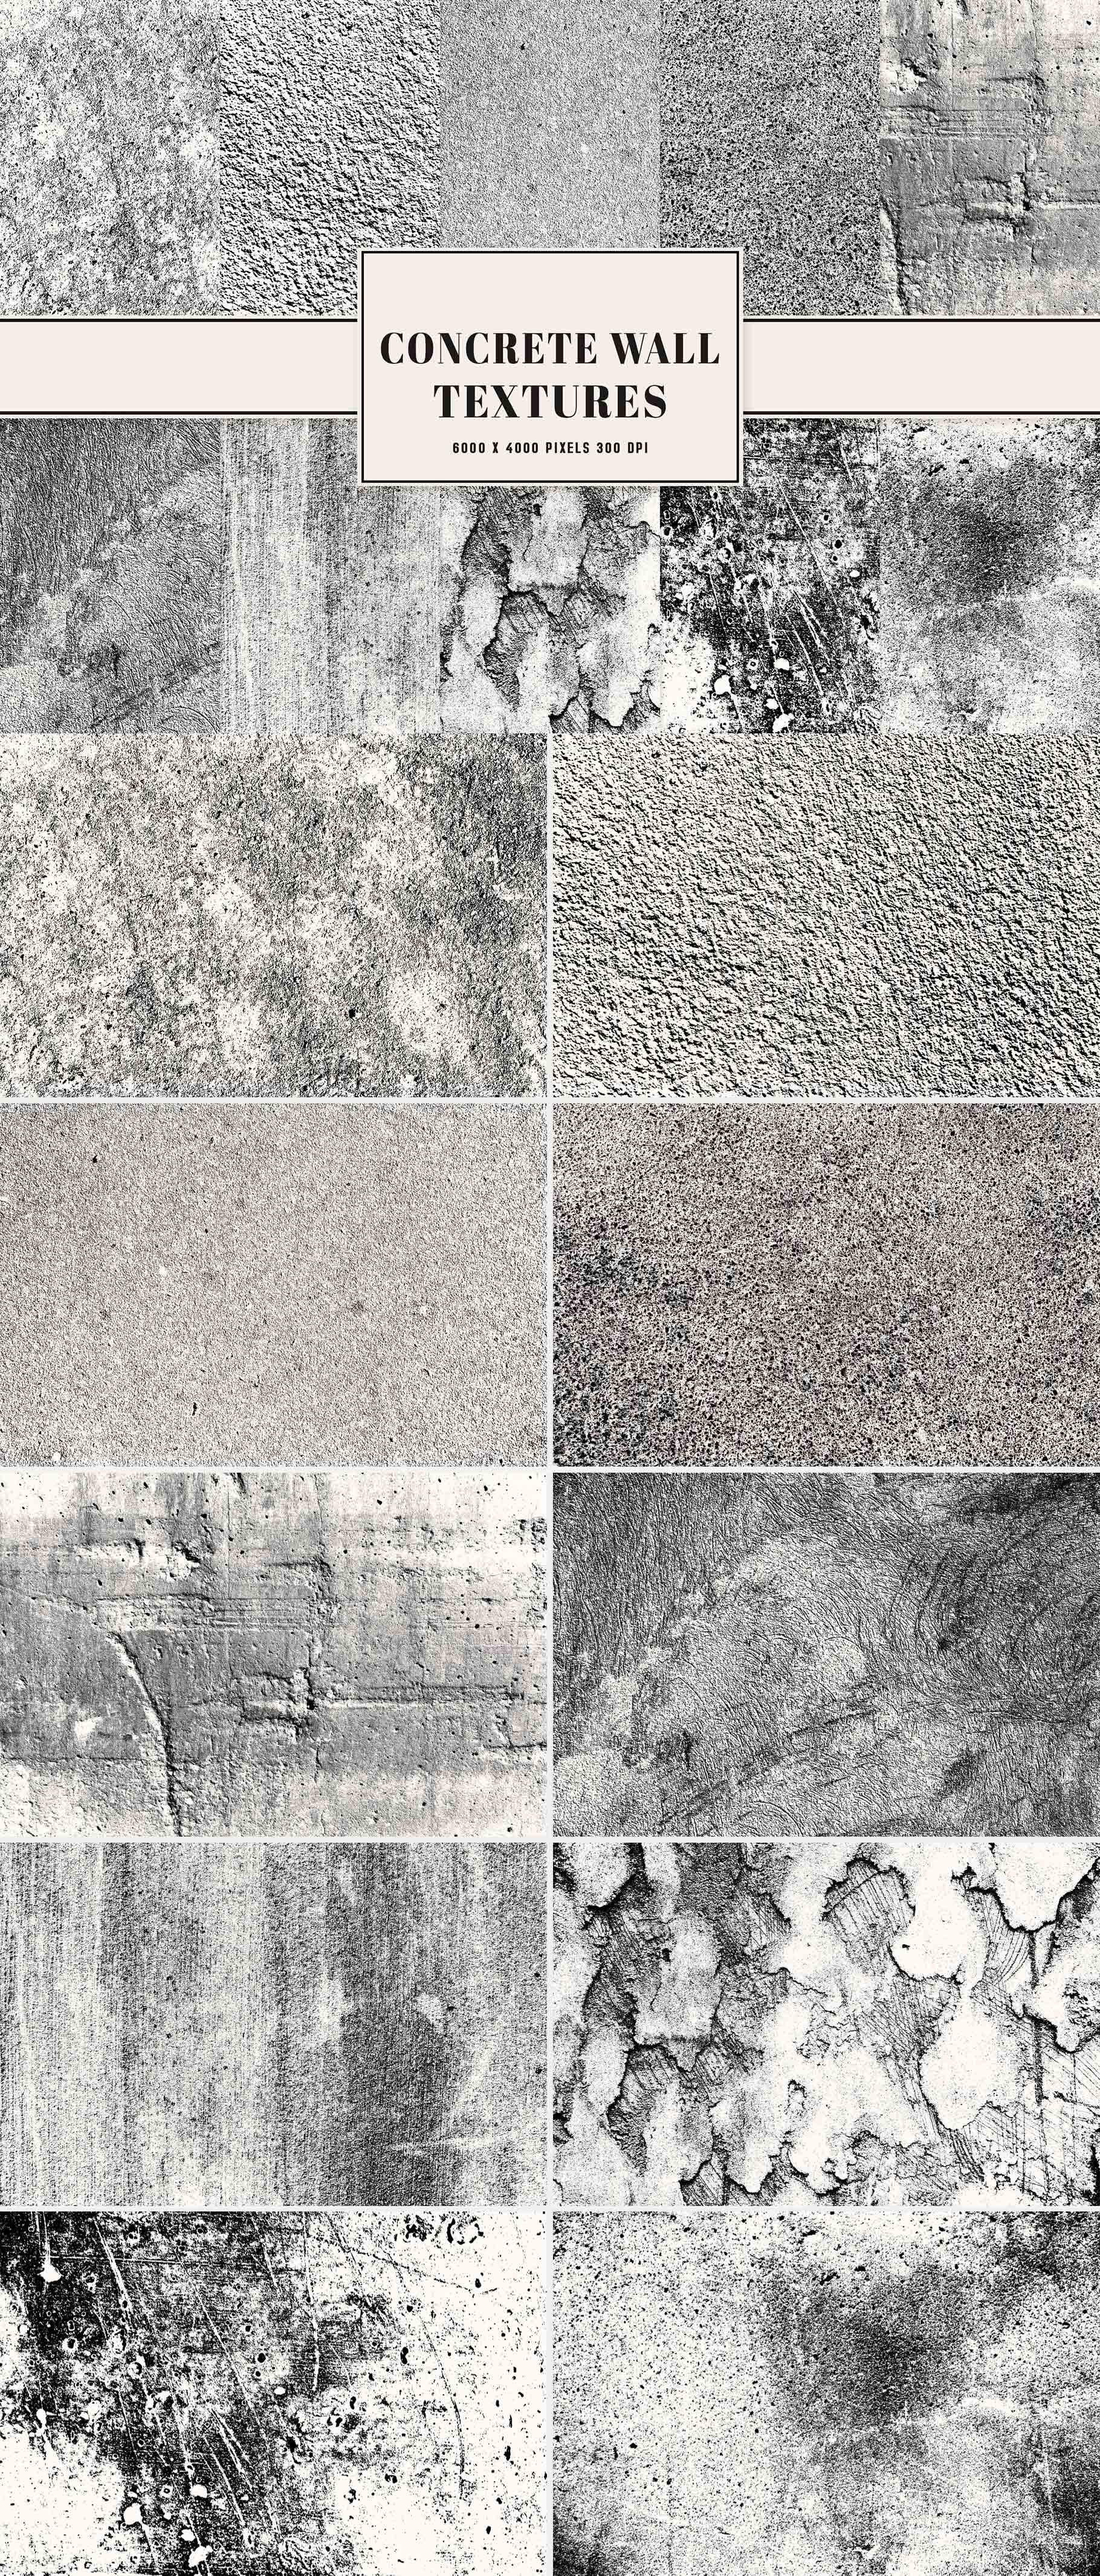 Concrete Wall Textures cover image.